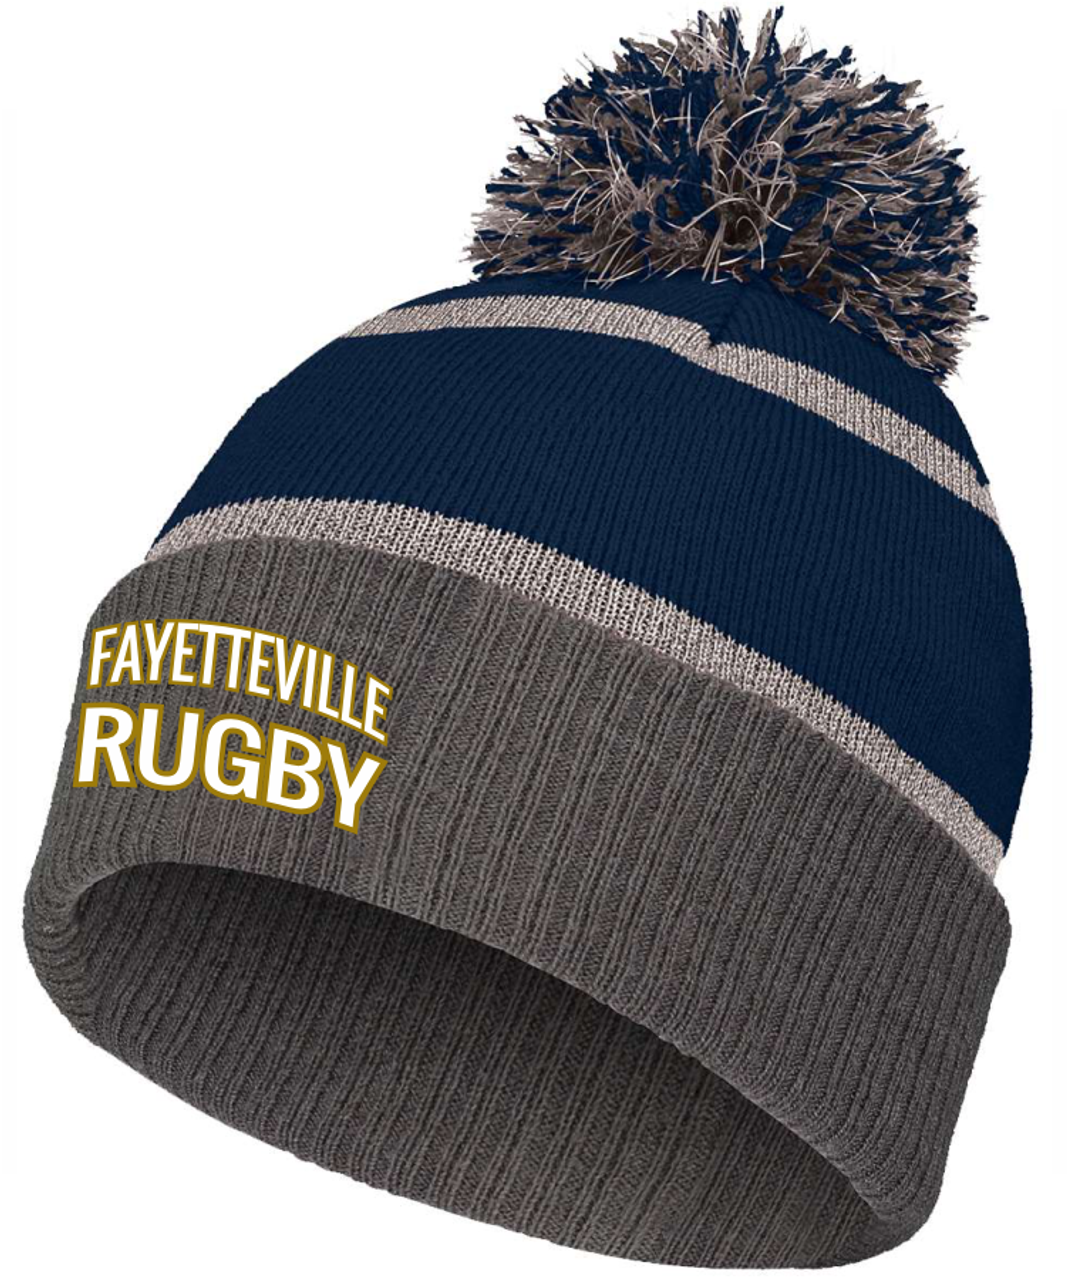 Fayetteville Area Rugby Pom Beanie, Navy/Gray